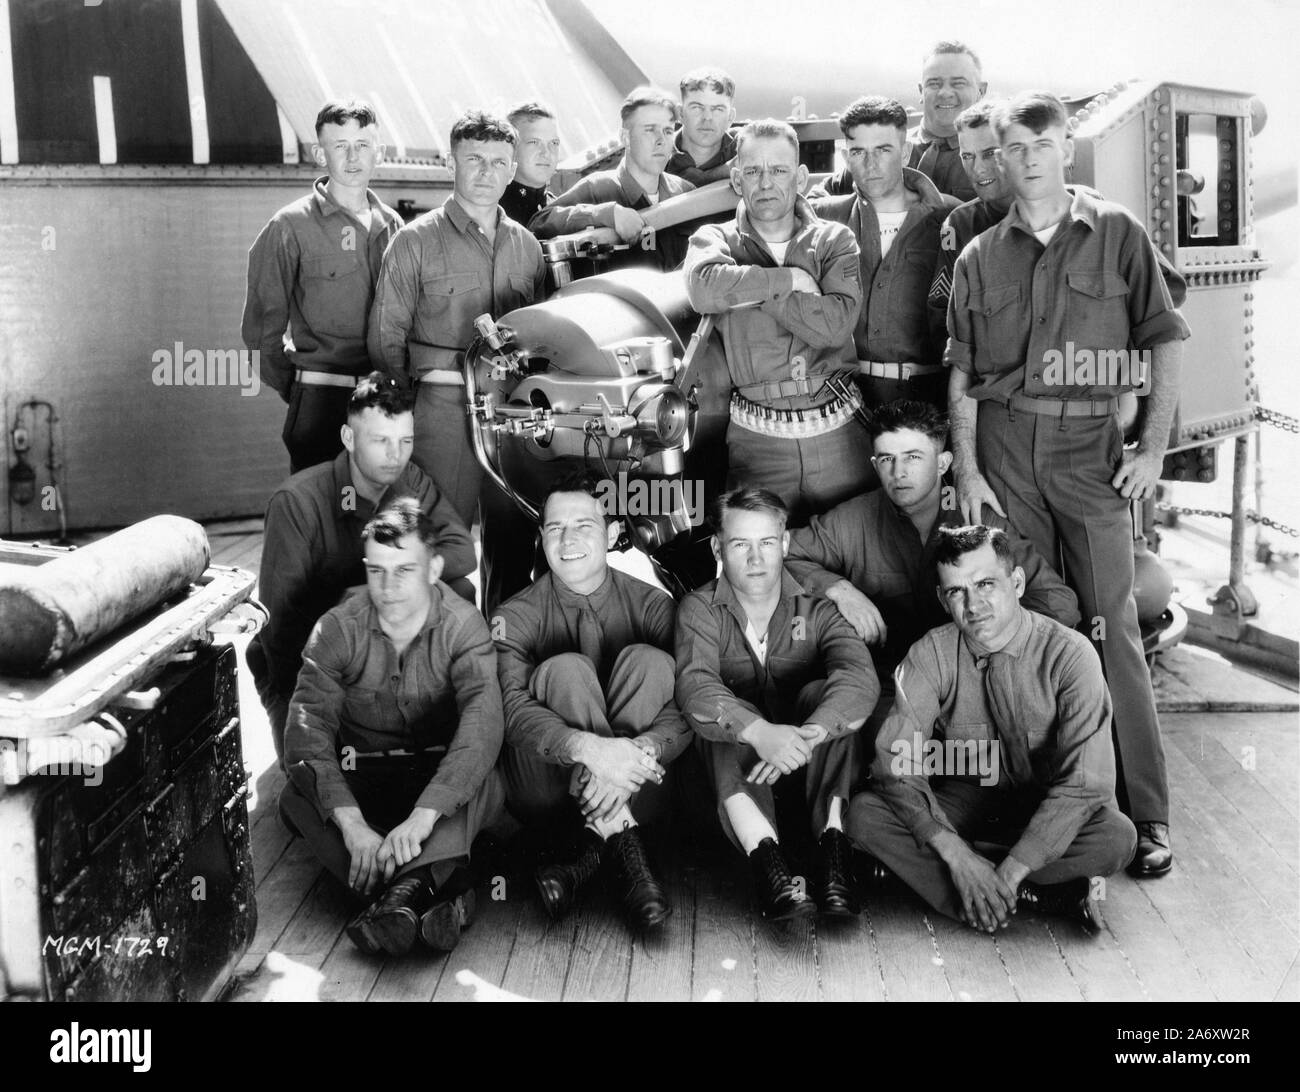 LON CHANEY and WILLIAM HAINES with U.S. Marines candid during filming on Battleship U.S.S.CALIFORNIA of TELL IT TO THE MARINES 1926 director George W. Hill Silent movie with the Co-operation and Endorsement of the U.S. Marine Corps Metro Goldwyn Mayer Stock Photo